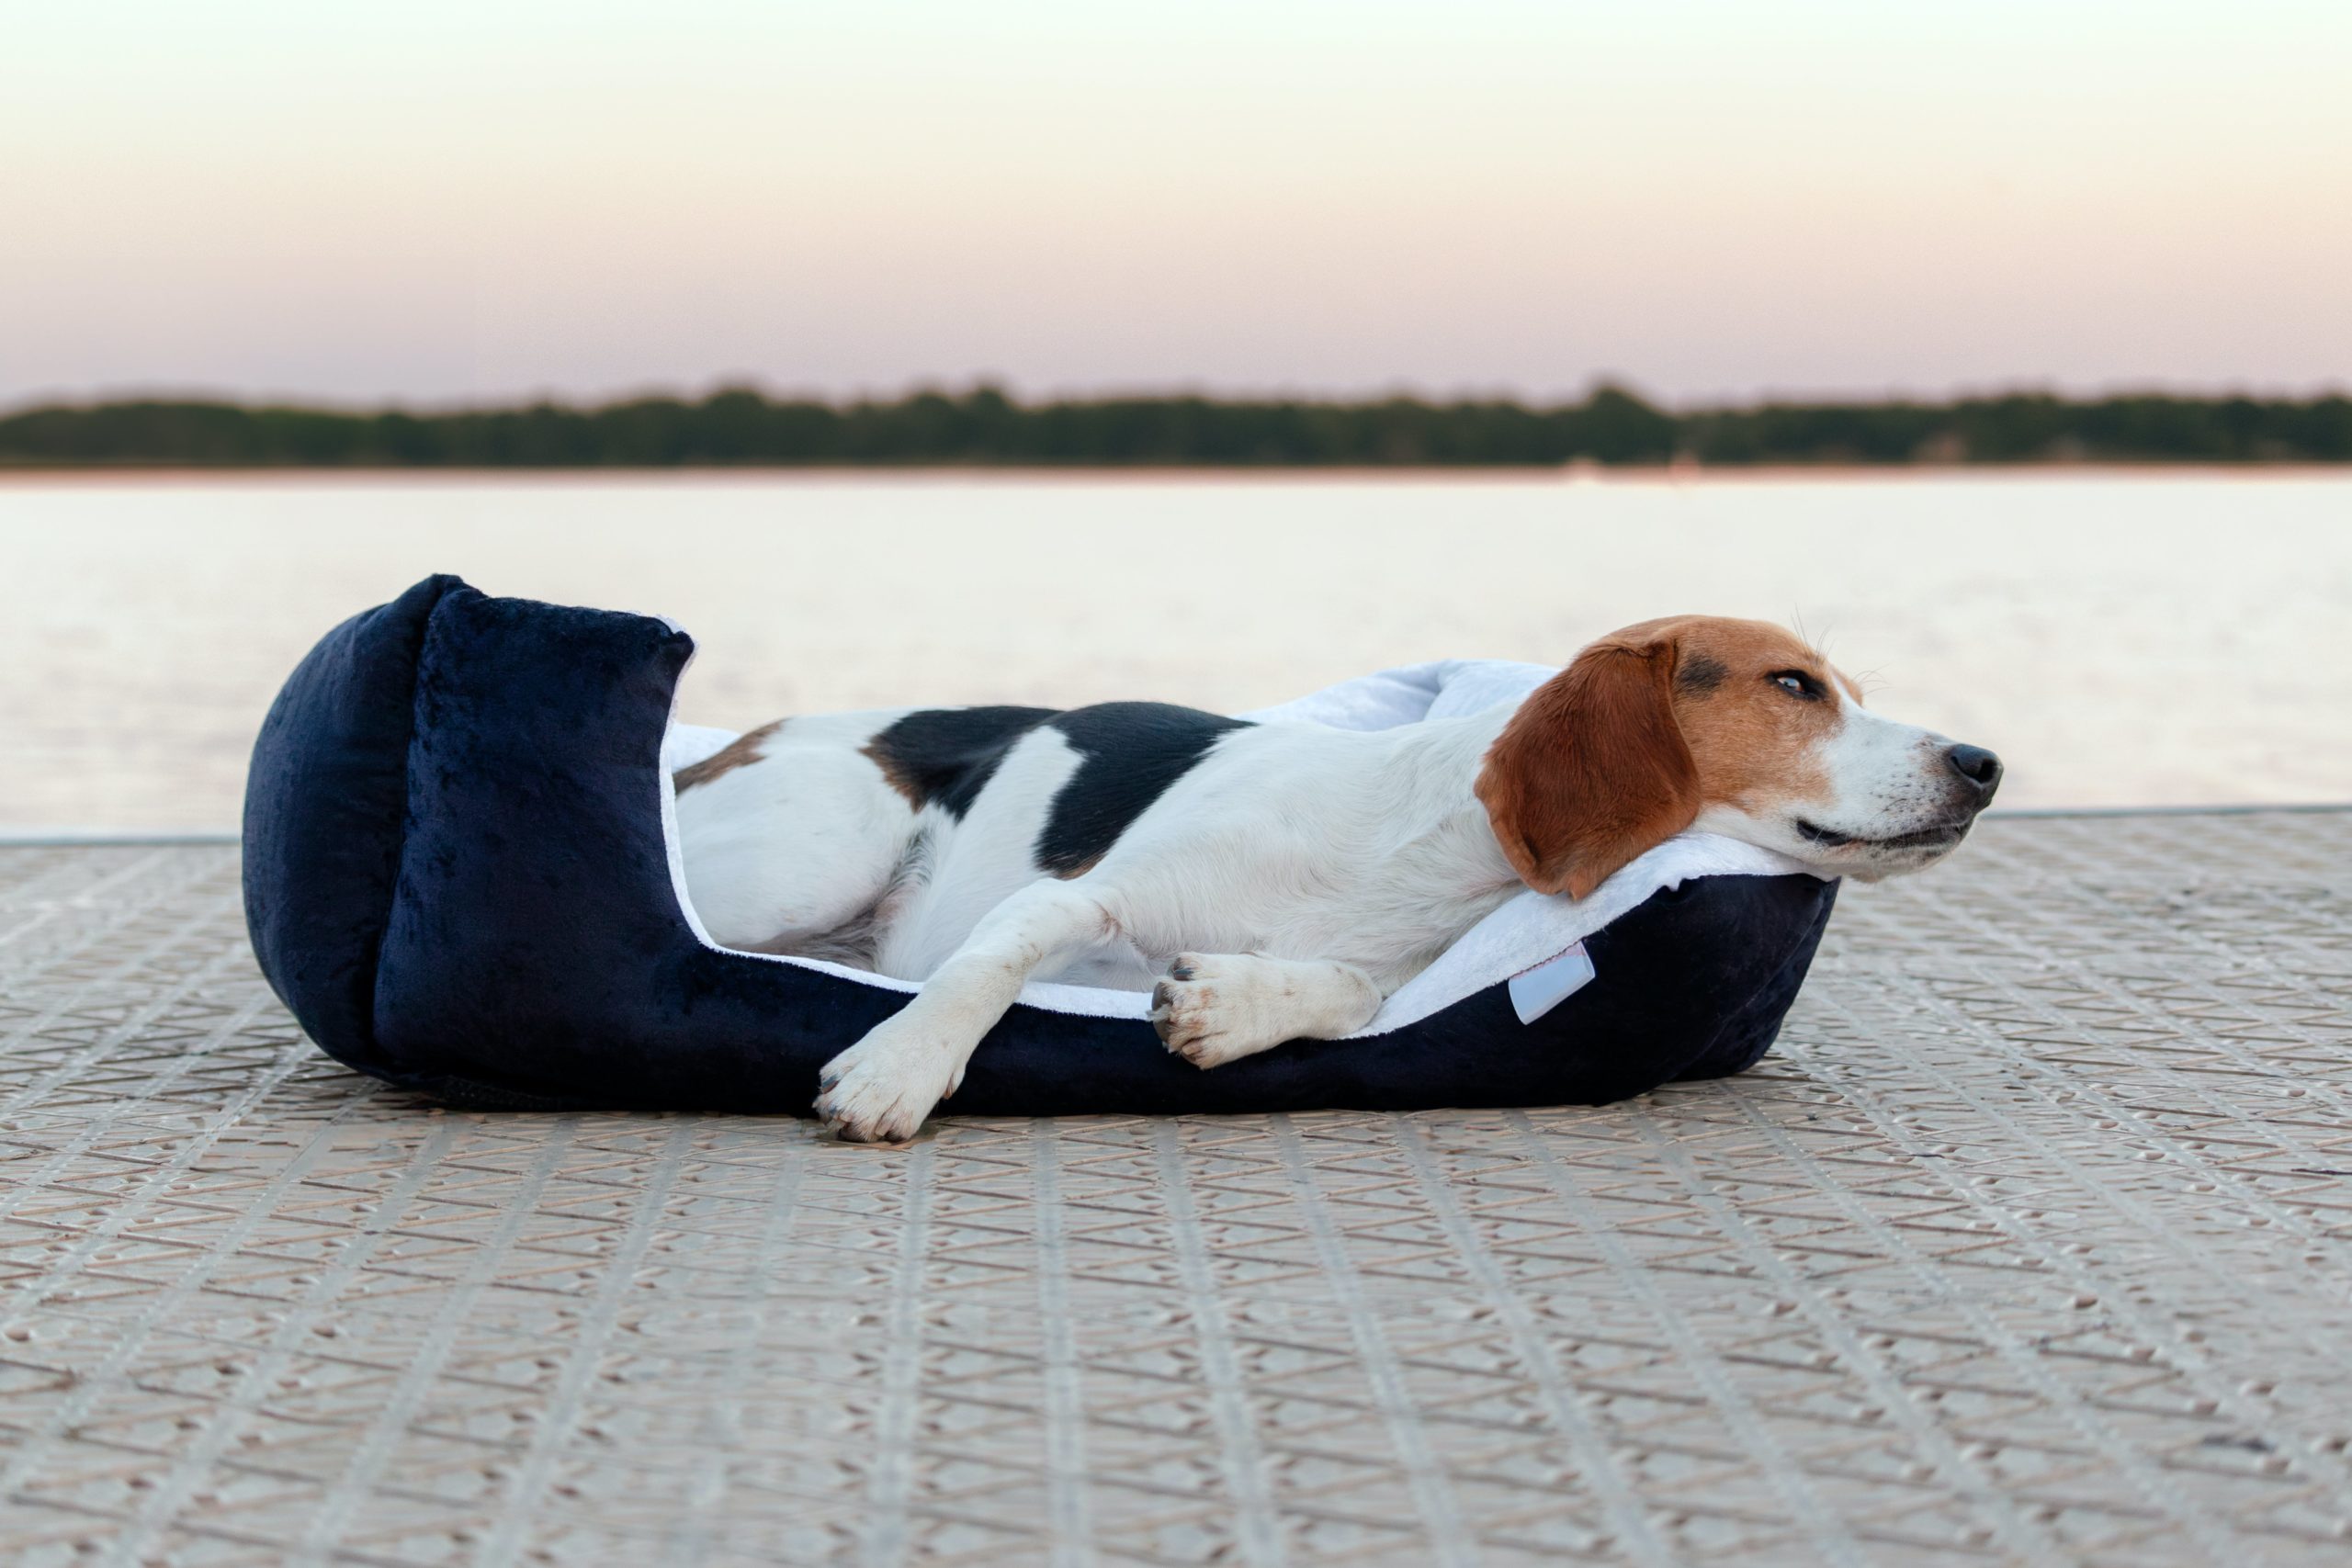 Beagle harrier enjoying some resting time after a long day out